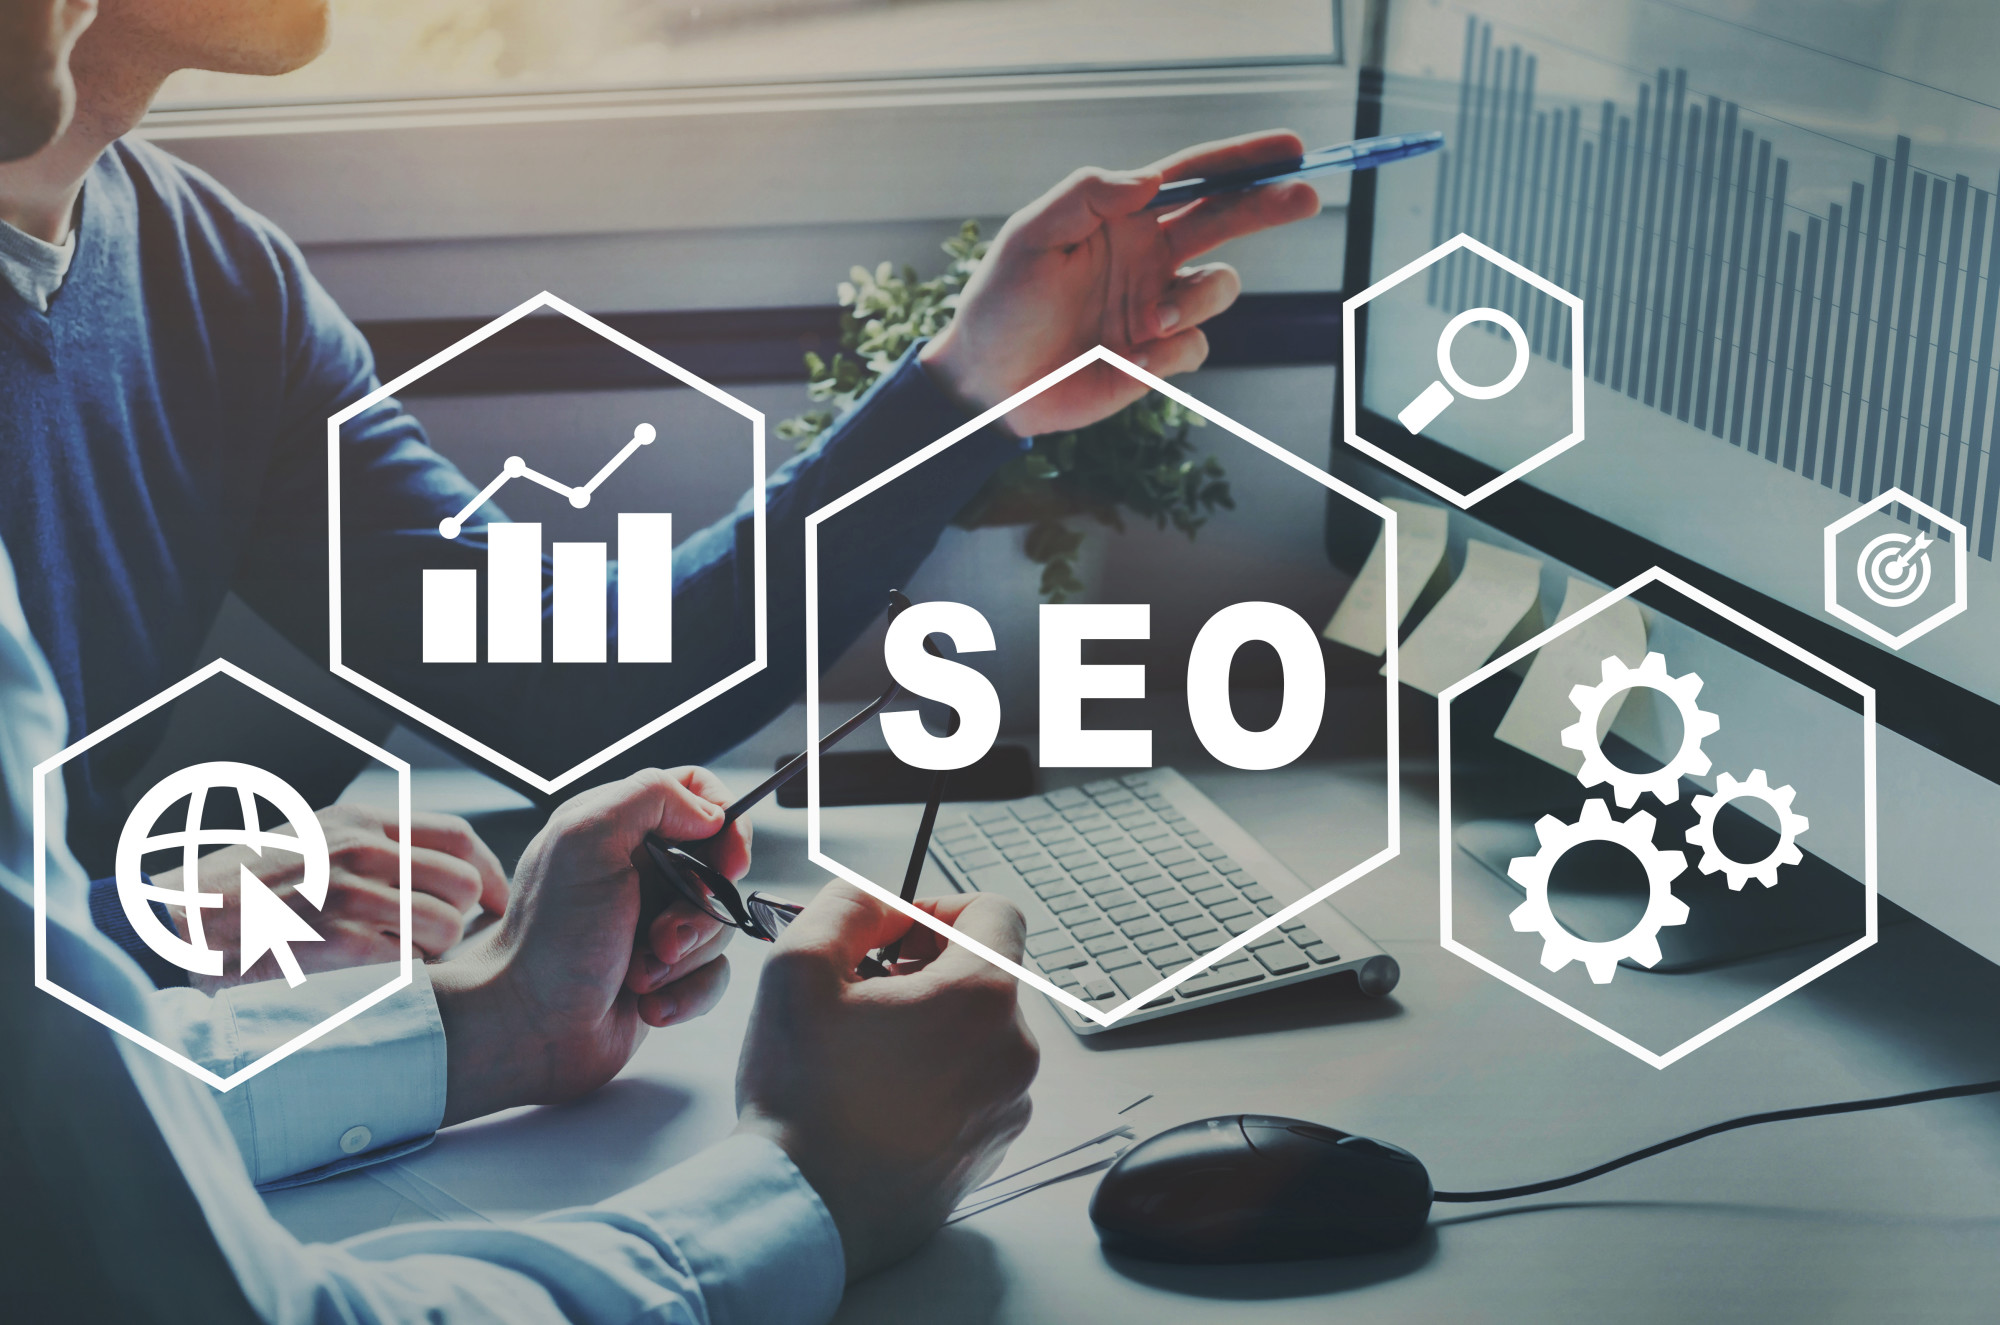 Using SEO for Growth: The 5 Biggest SEO Trends You Need to Follow in 2020